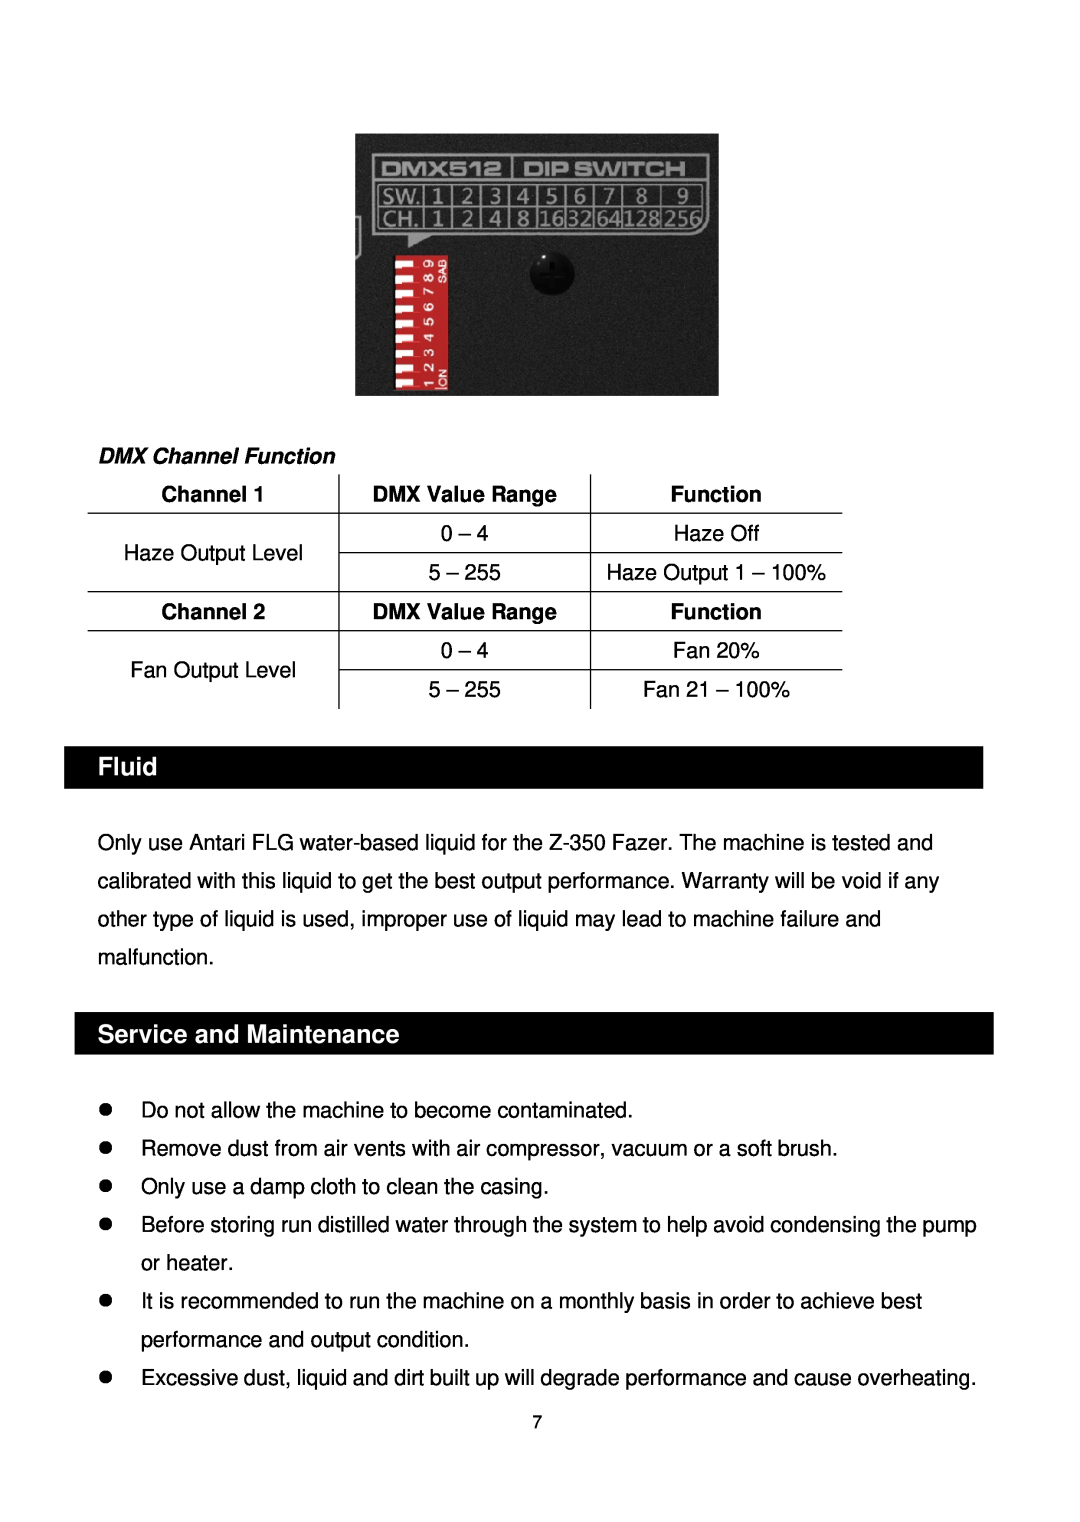 Antari Lighting and Effects Z-350 user manual Fluid, Service and Maintenance, Channel, DMX Value Range, Function 